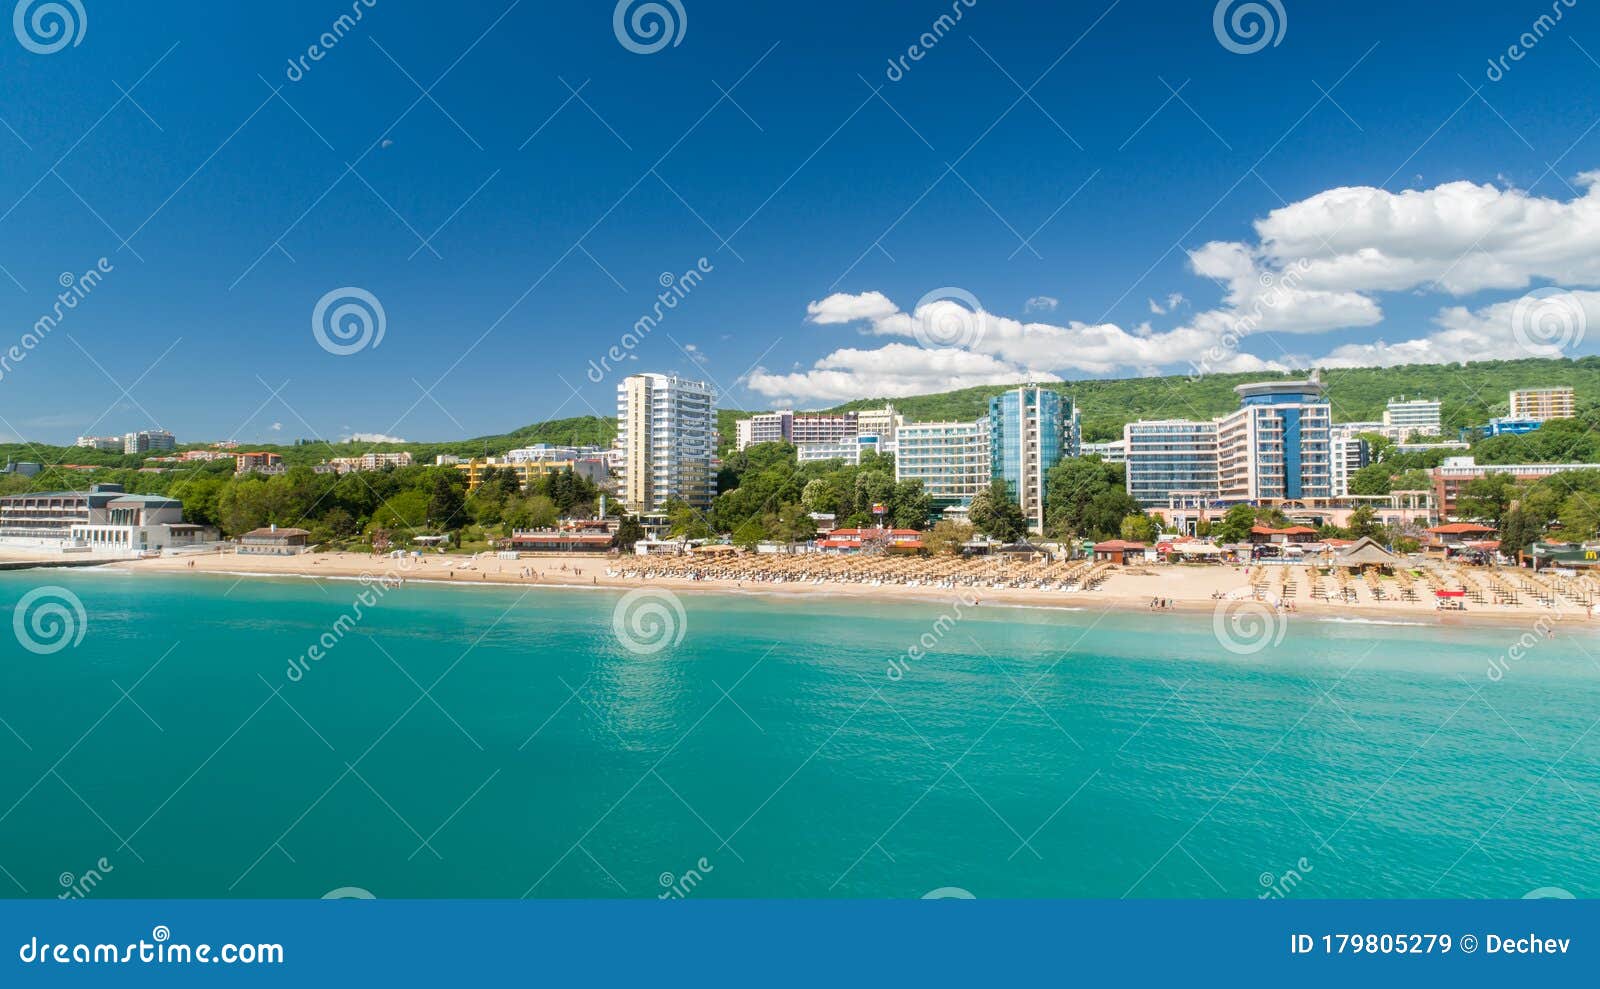 aerial view of the beach and hotels in golden sands. popular summer resort near varna, bulgaria